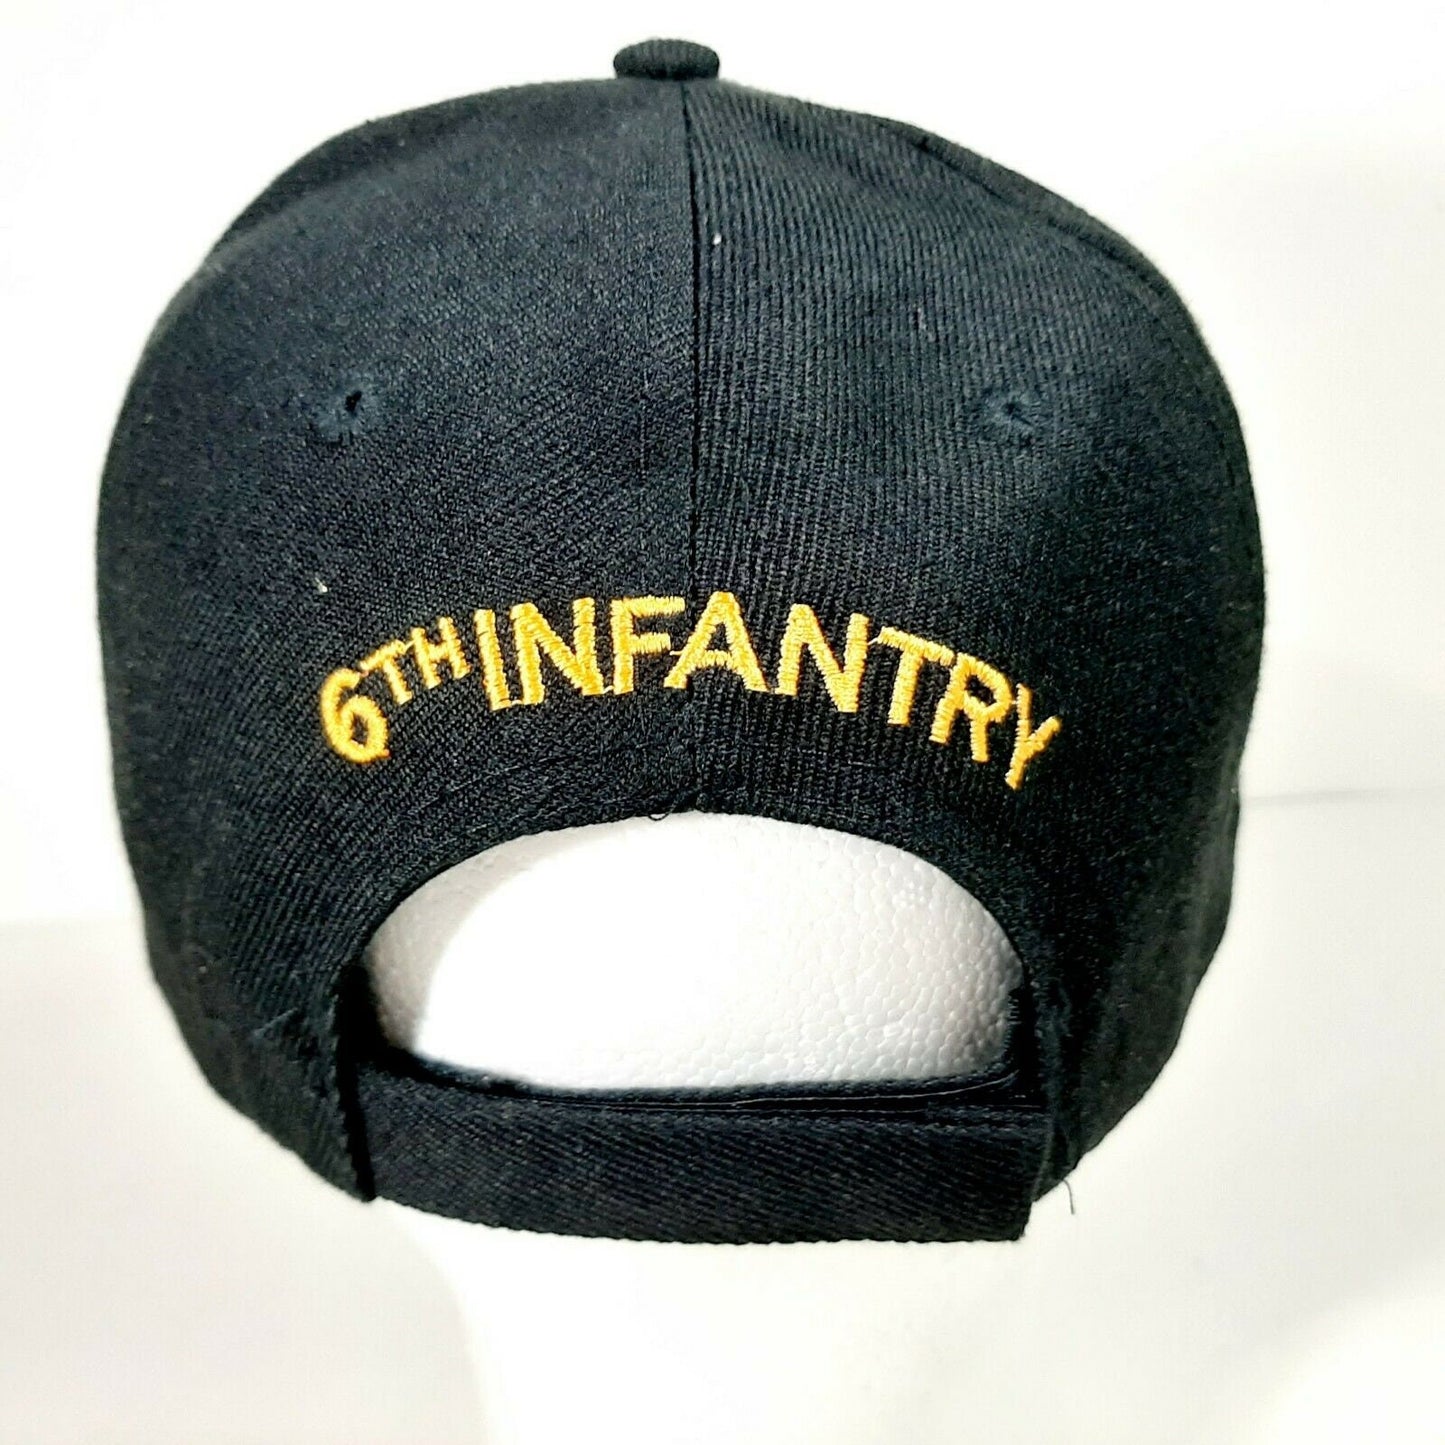 US Army 6th Infantry Division Men's Ball Cap Hat Black Embroidered Acrylic